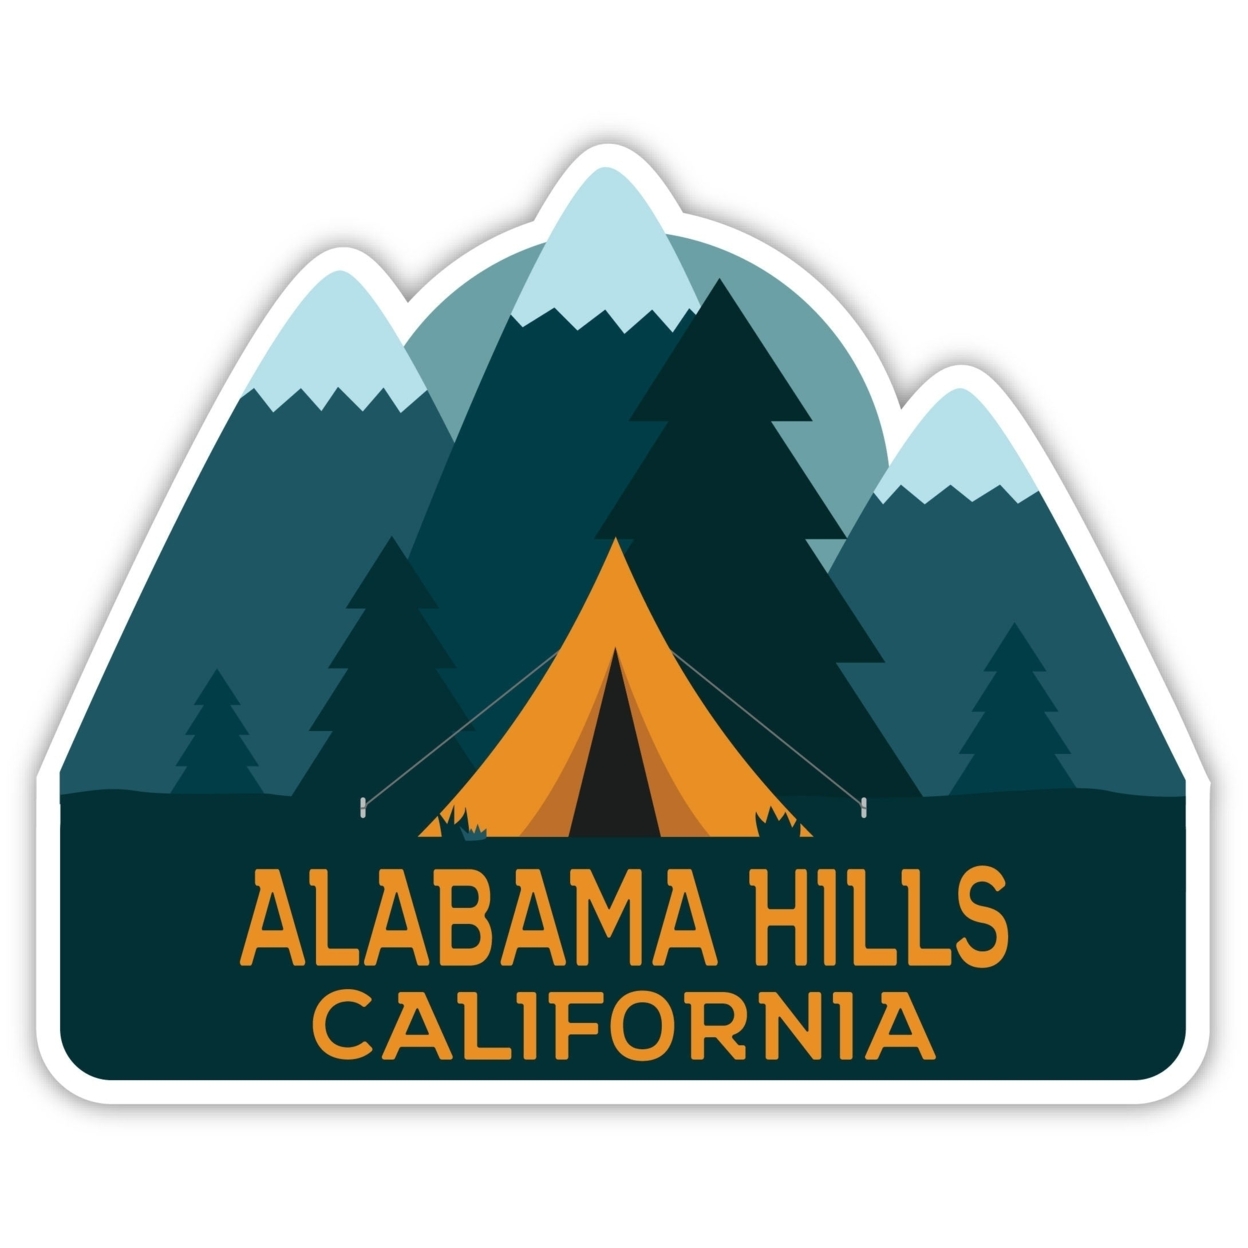 Alabama Hills California Souvenir Decorative Stickers (Choose Theme And Size) - 4-Pack, 8-Inch, Tent